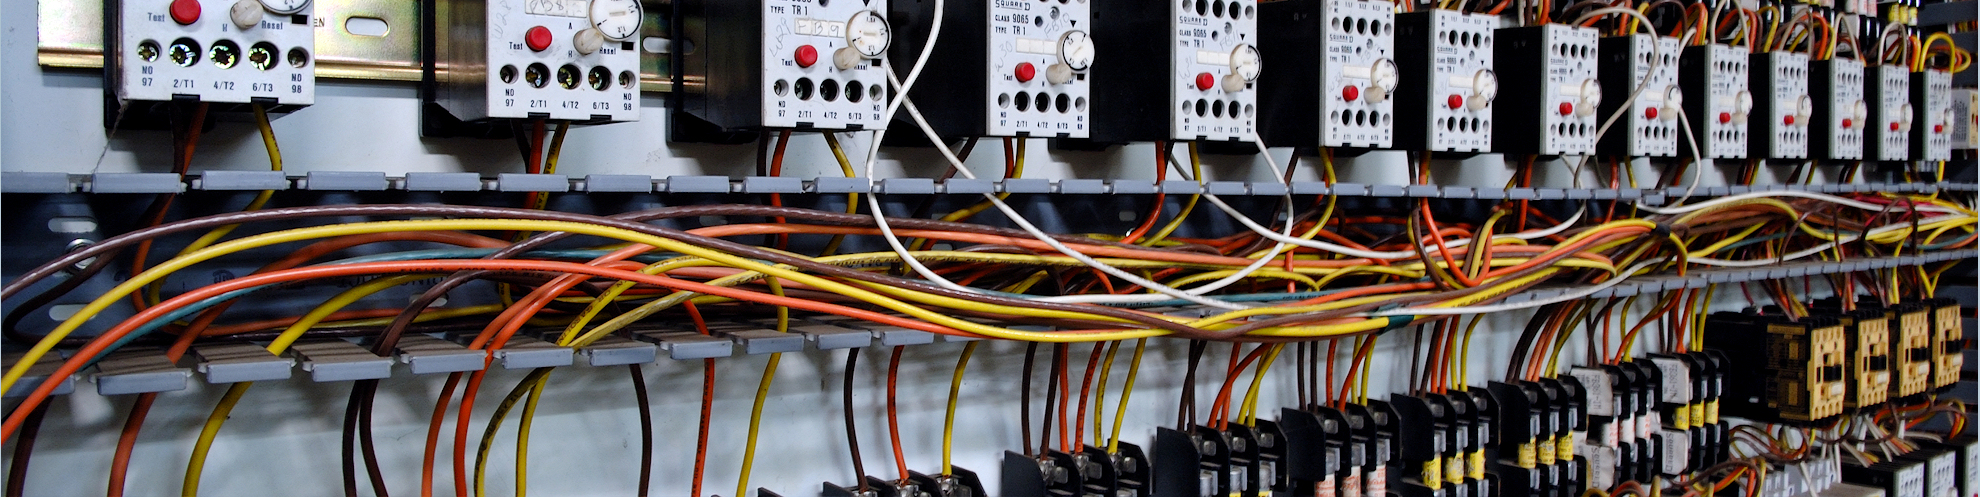 Electrical wiring panel at a assembly line factory. Controls and switches.